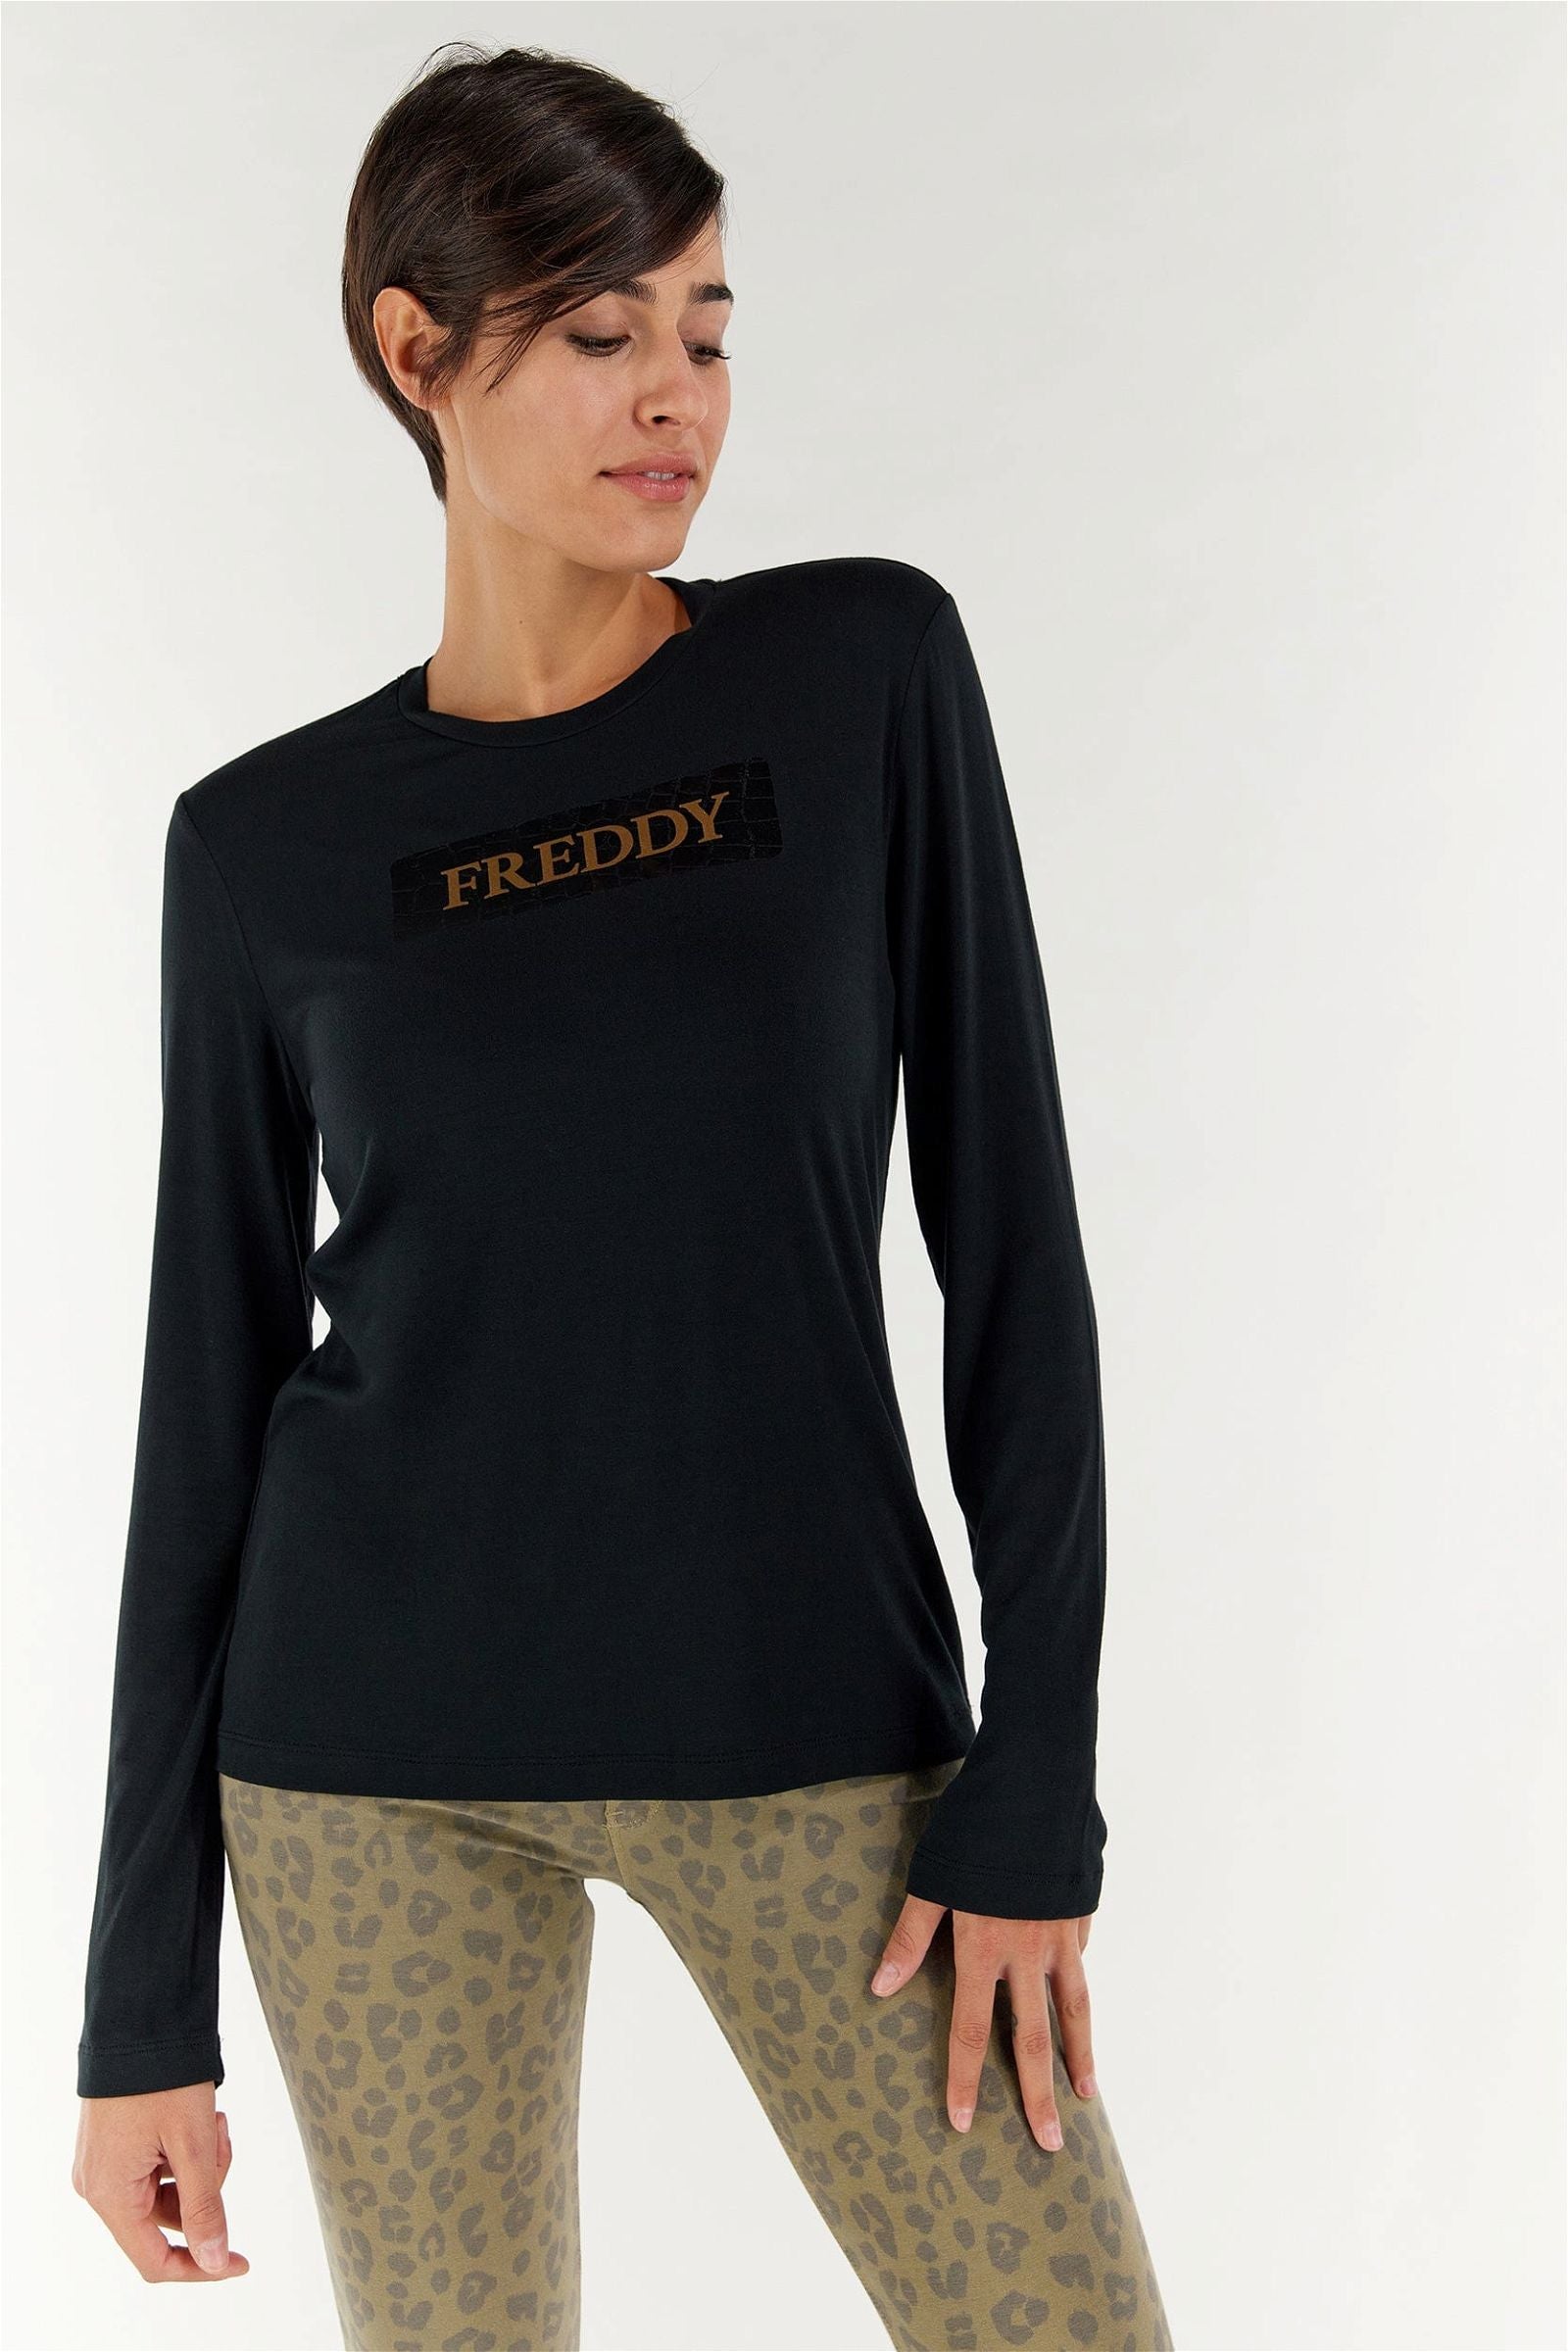 Long Sleeve Shirt - Black with Gold Freddy lettering in a crocodile box 2